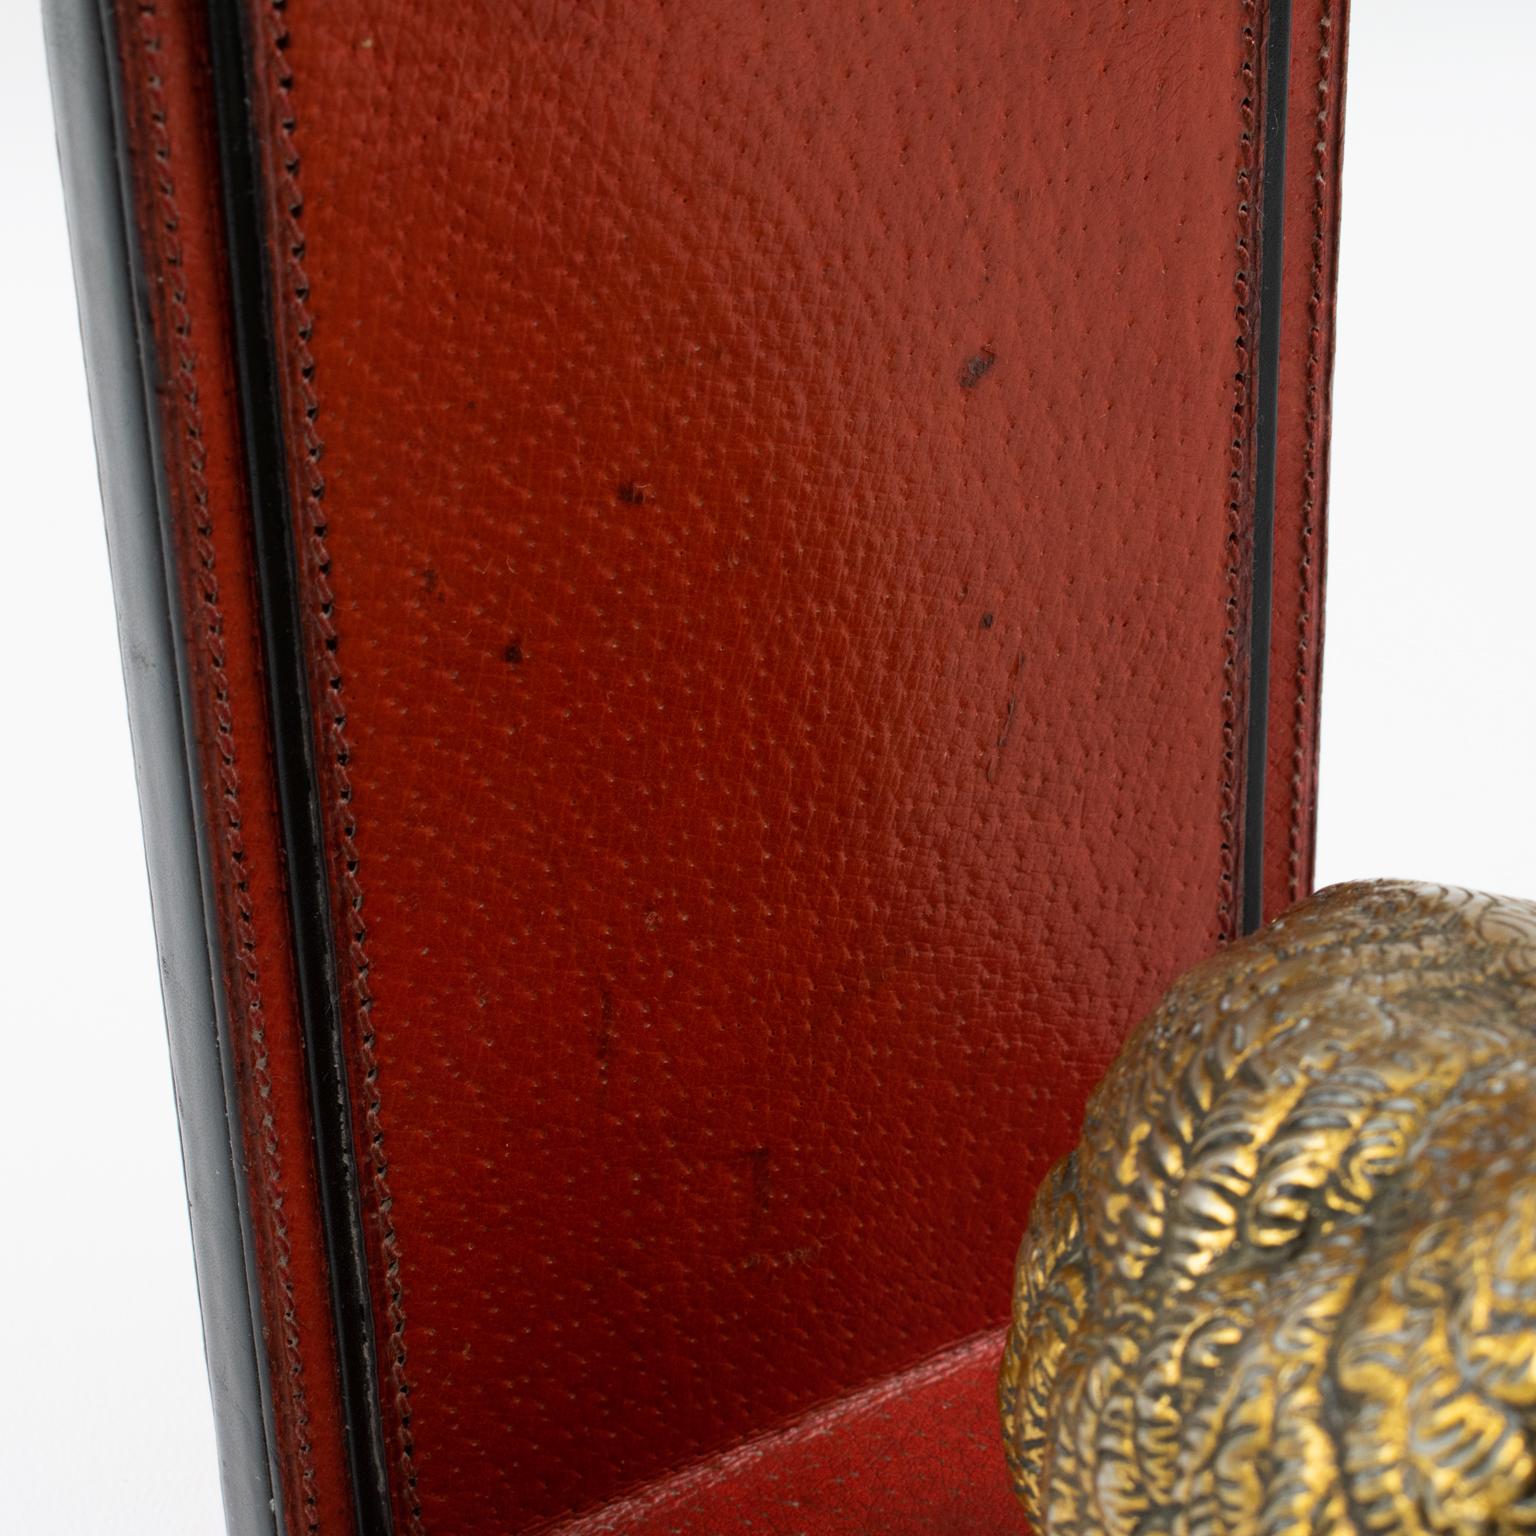 Gucci Italy Hand-Stitched Red Leather Bookends with Gilt Metal Partridges, 1970s 13